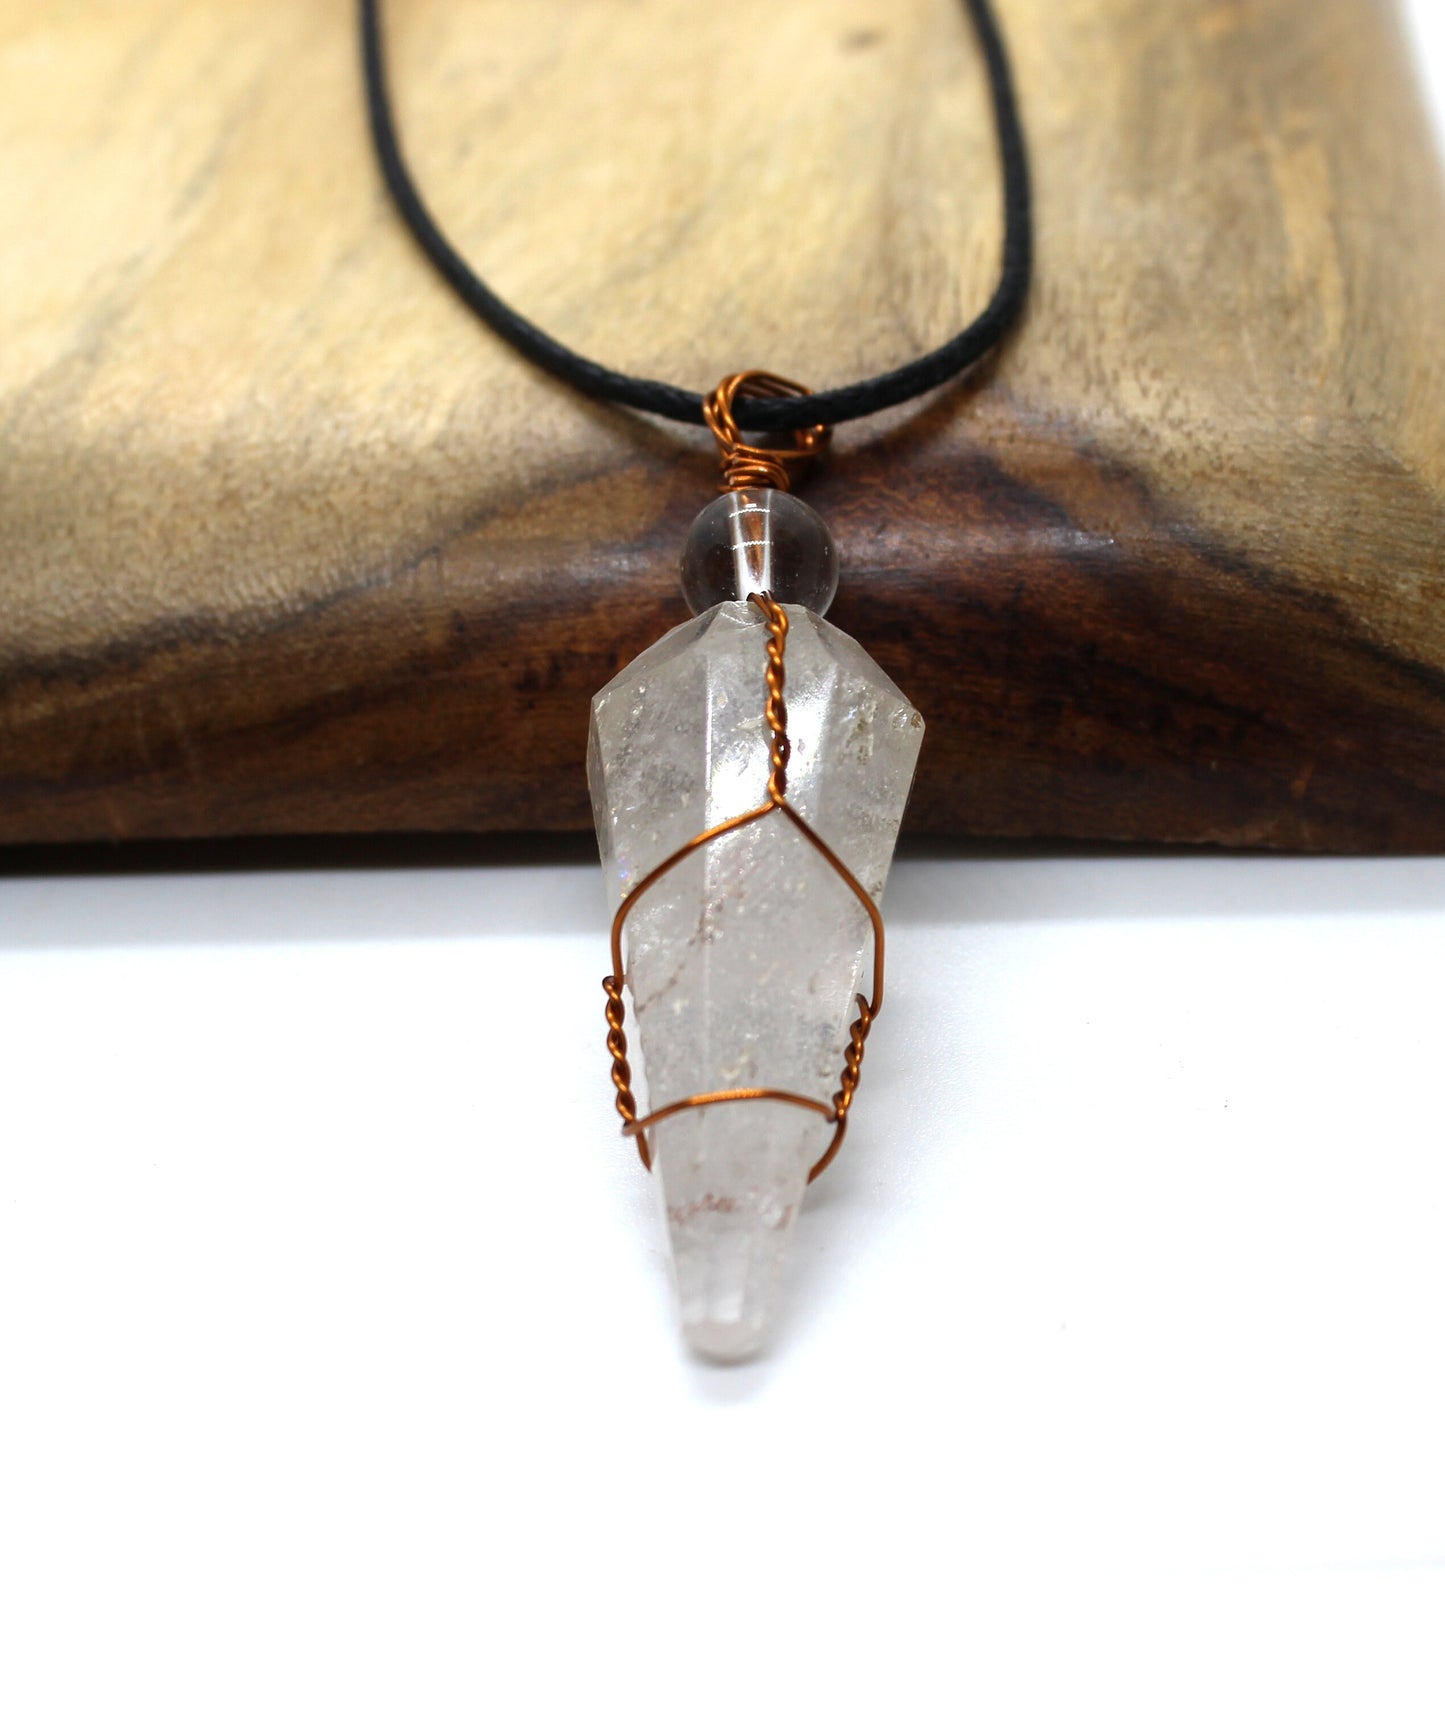 Crystal Quartz Pendant, Natural clear Quartz Crystal Necklace, Wire Wrapped Copper Pendant, Boho Jewelry, Cone shape  Reiki Energy Charged